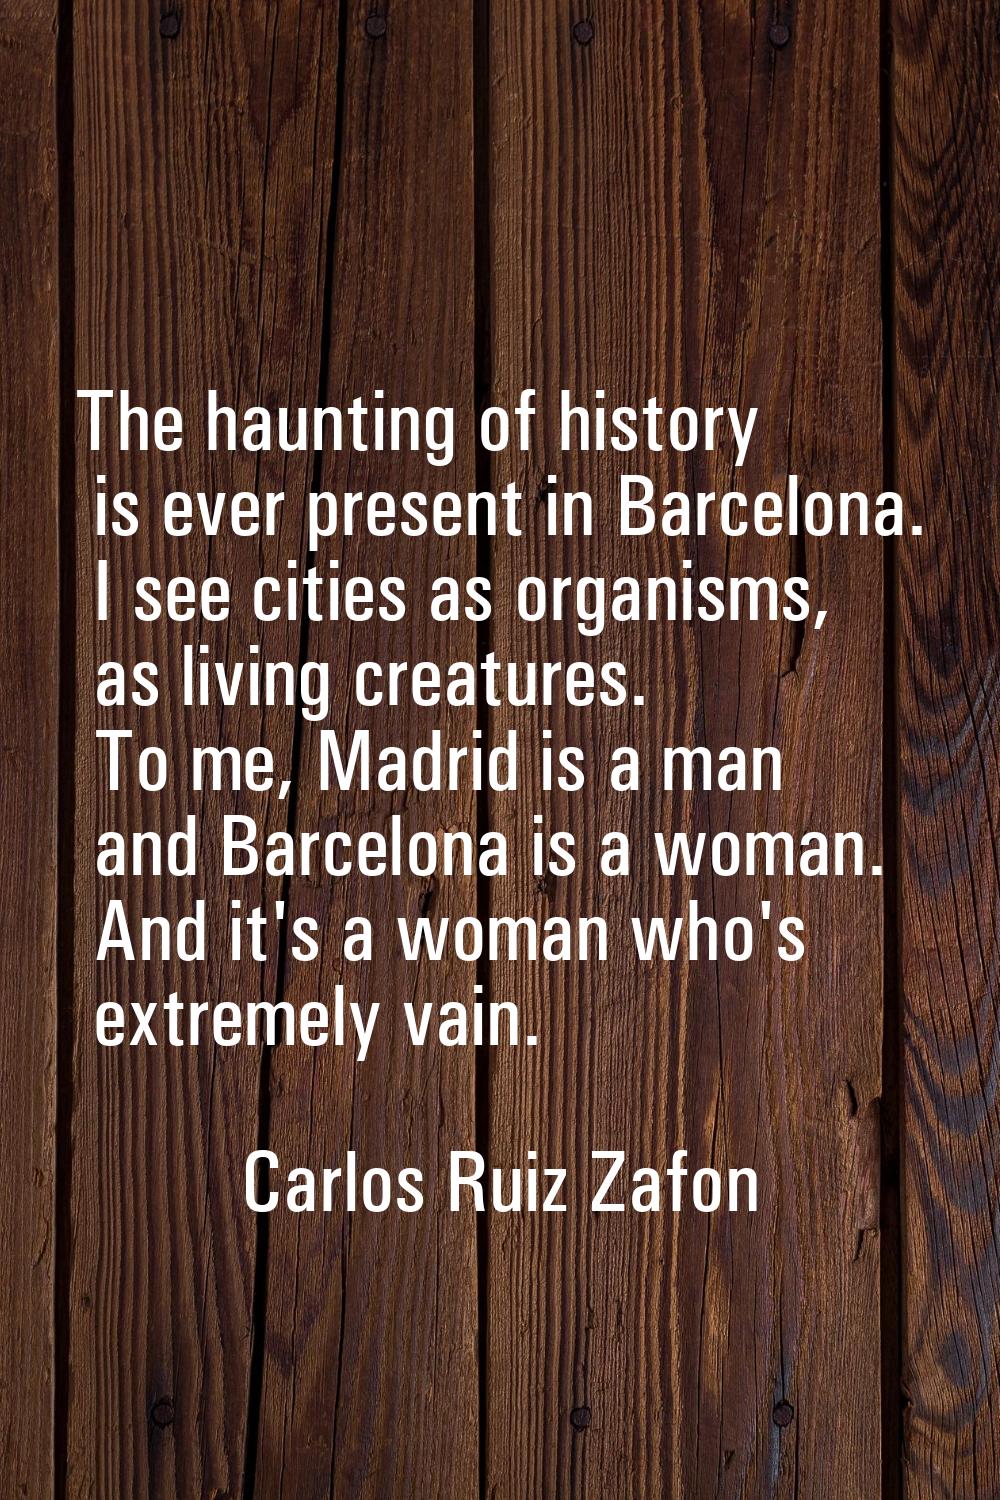 The haunting of history is ever present in Barcelona. I see cities as organisms, as living creature